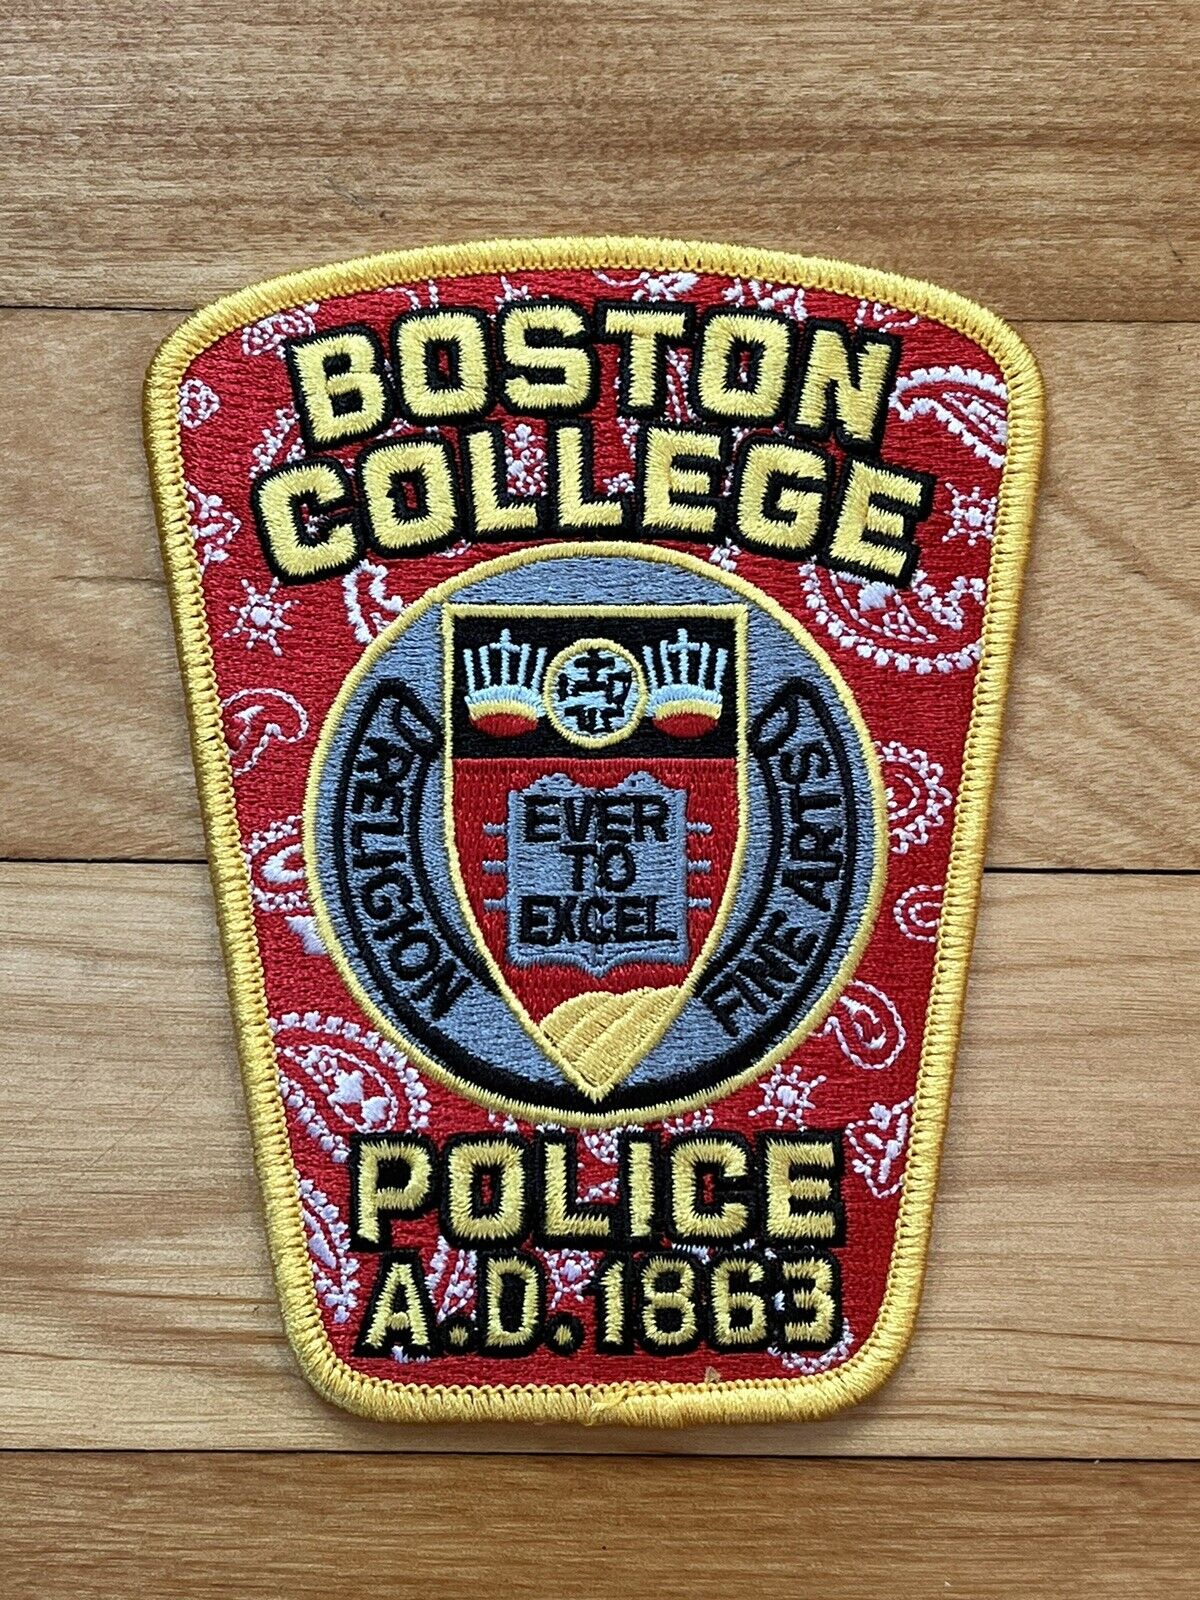 Boston College Police Red Bandana Patch BOSTON, MA Welles Crowther